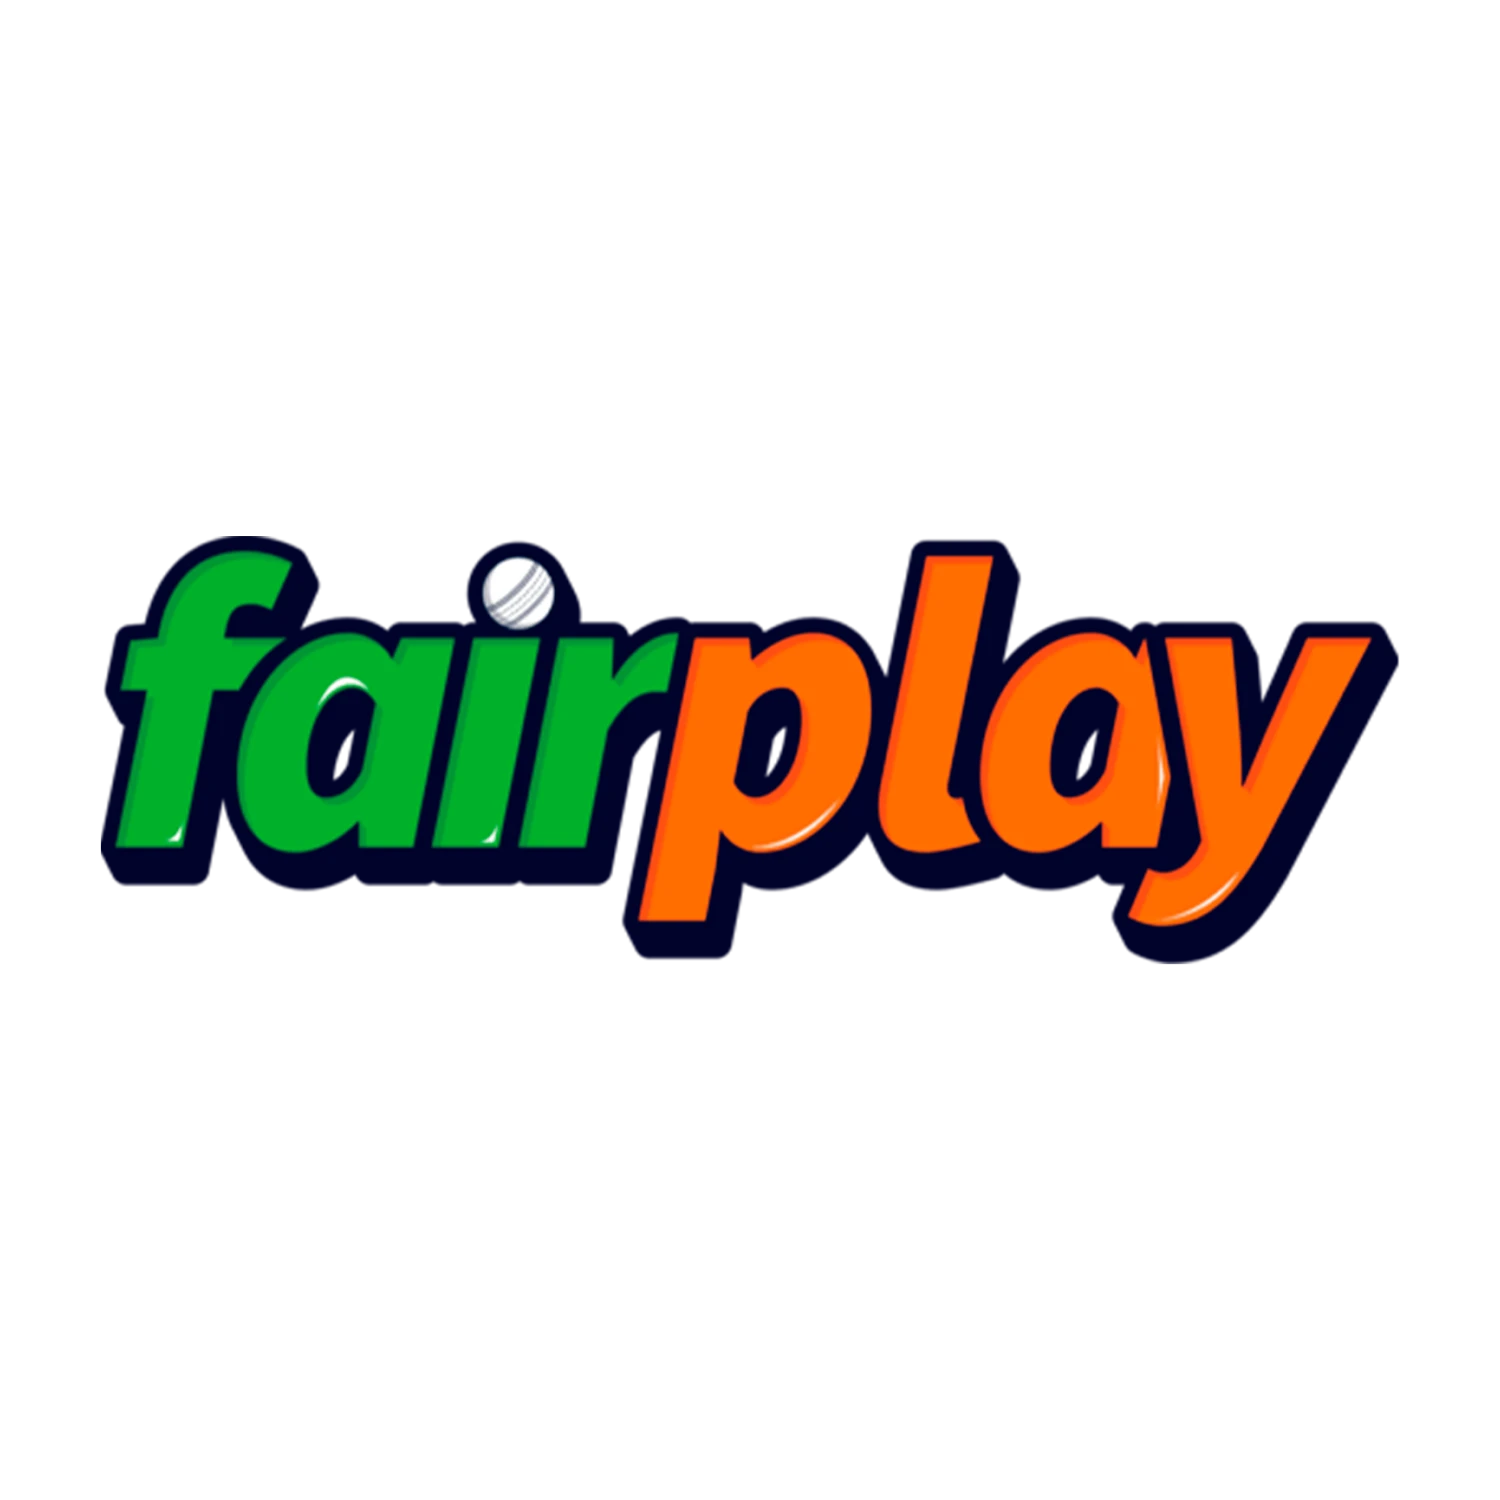 Fairplay offers legal cricket betting in India.